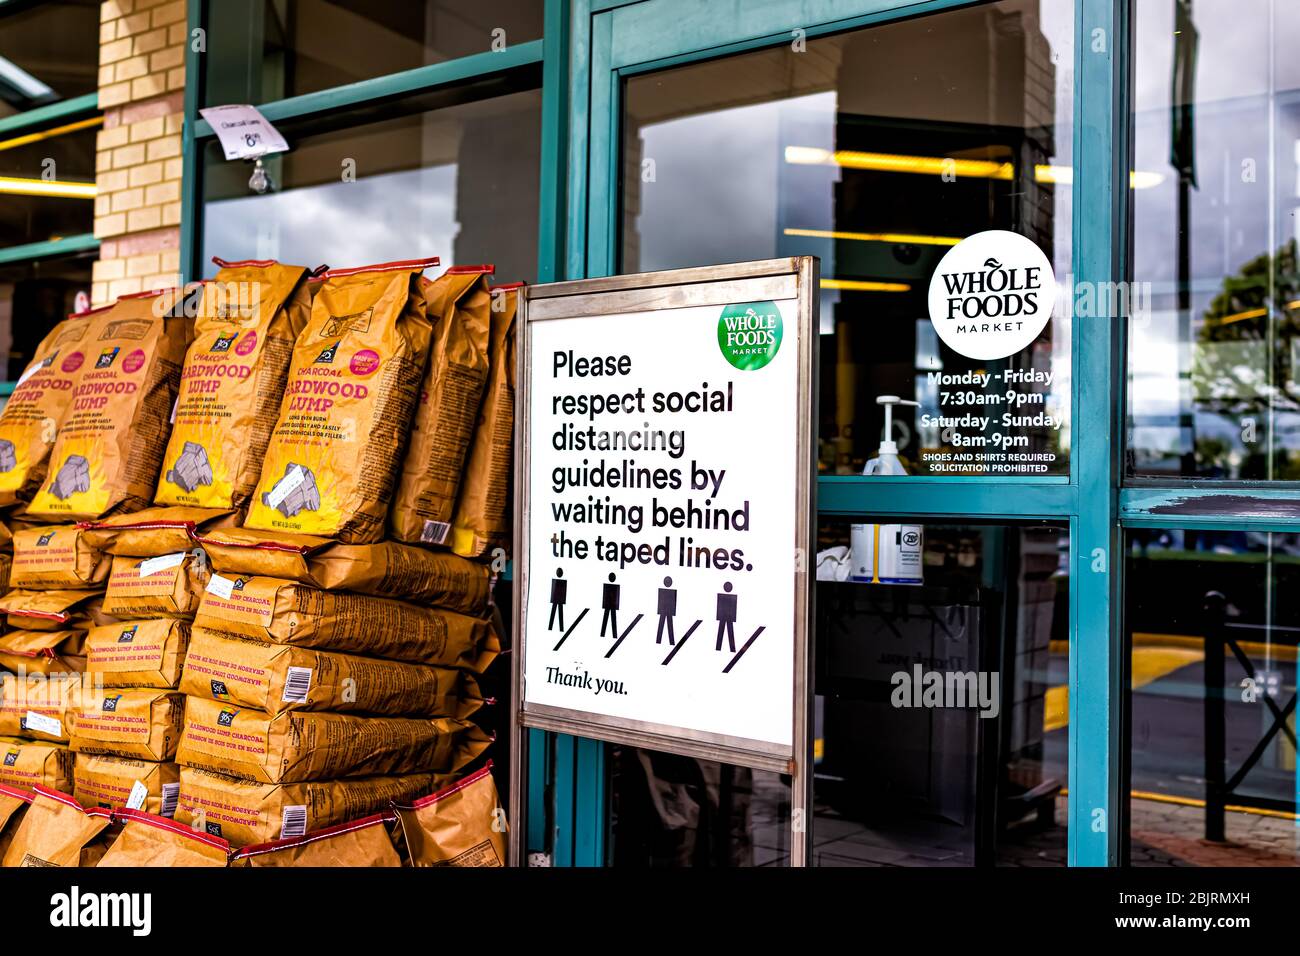 Reston, USA - April 27, 2020: Northern Virginia at Plaza America Whole Foods Amazon grocery store sign for social distancing at shop entrance Stock Photo